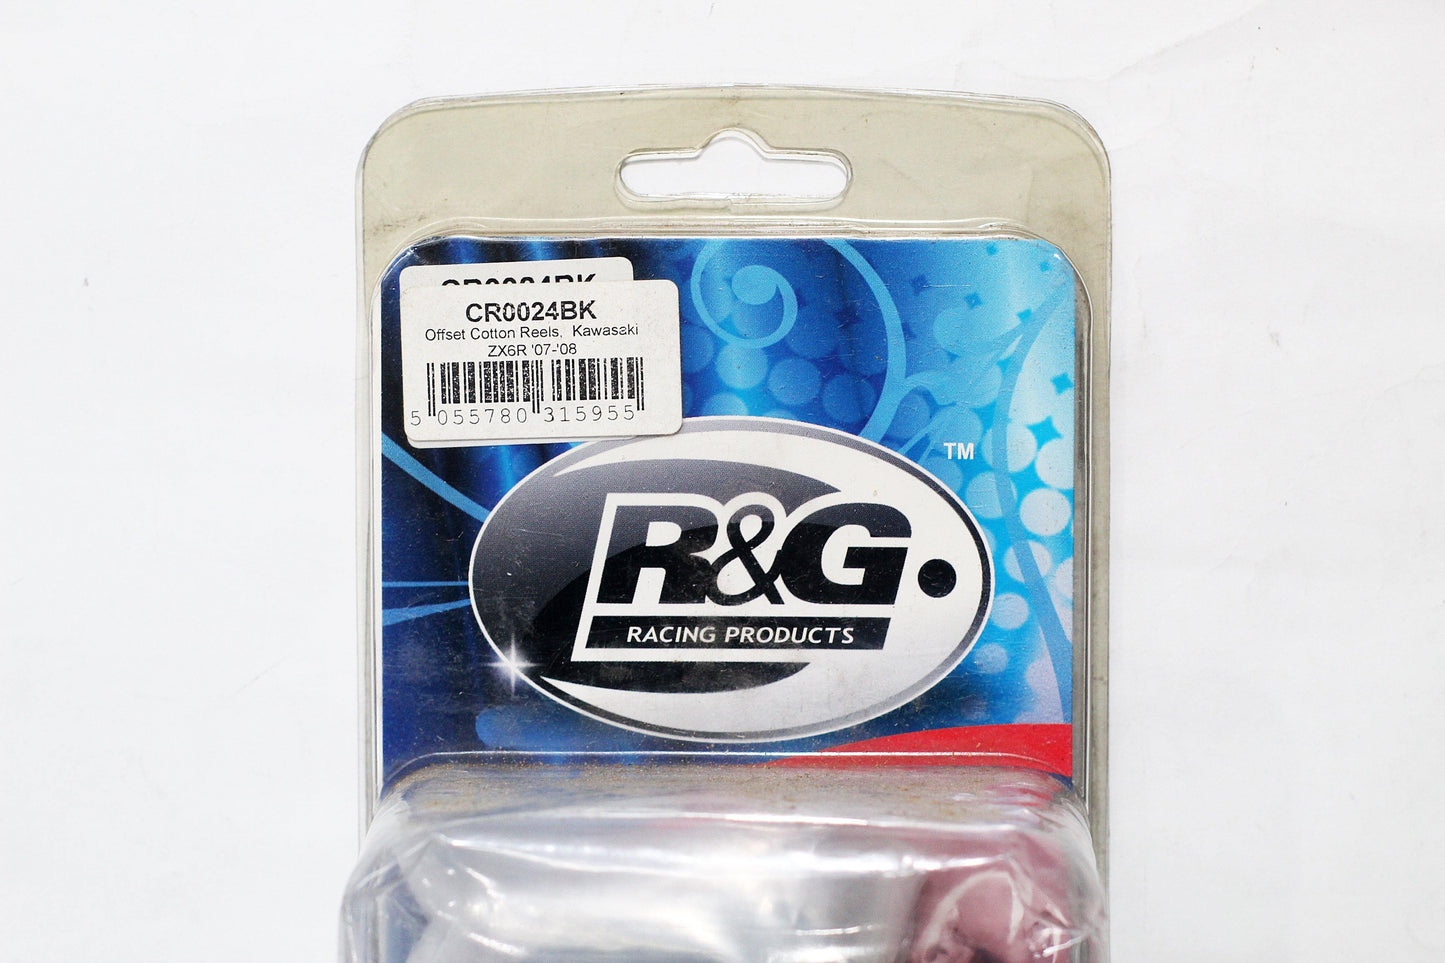 R&G Cotton Reels (Offset) fits for Kawasaki ZX-6R ('07-'08) Models - Durian Bikers